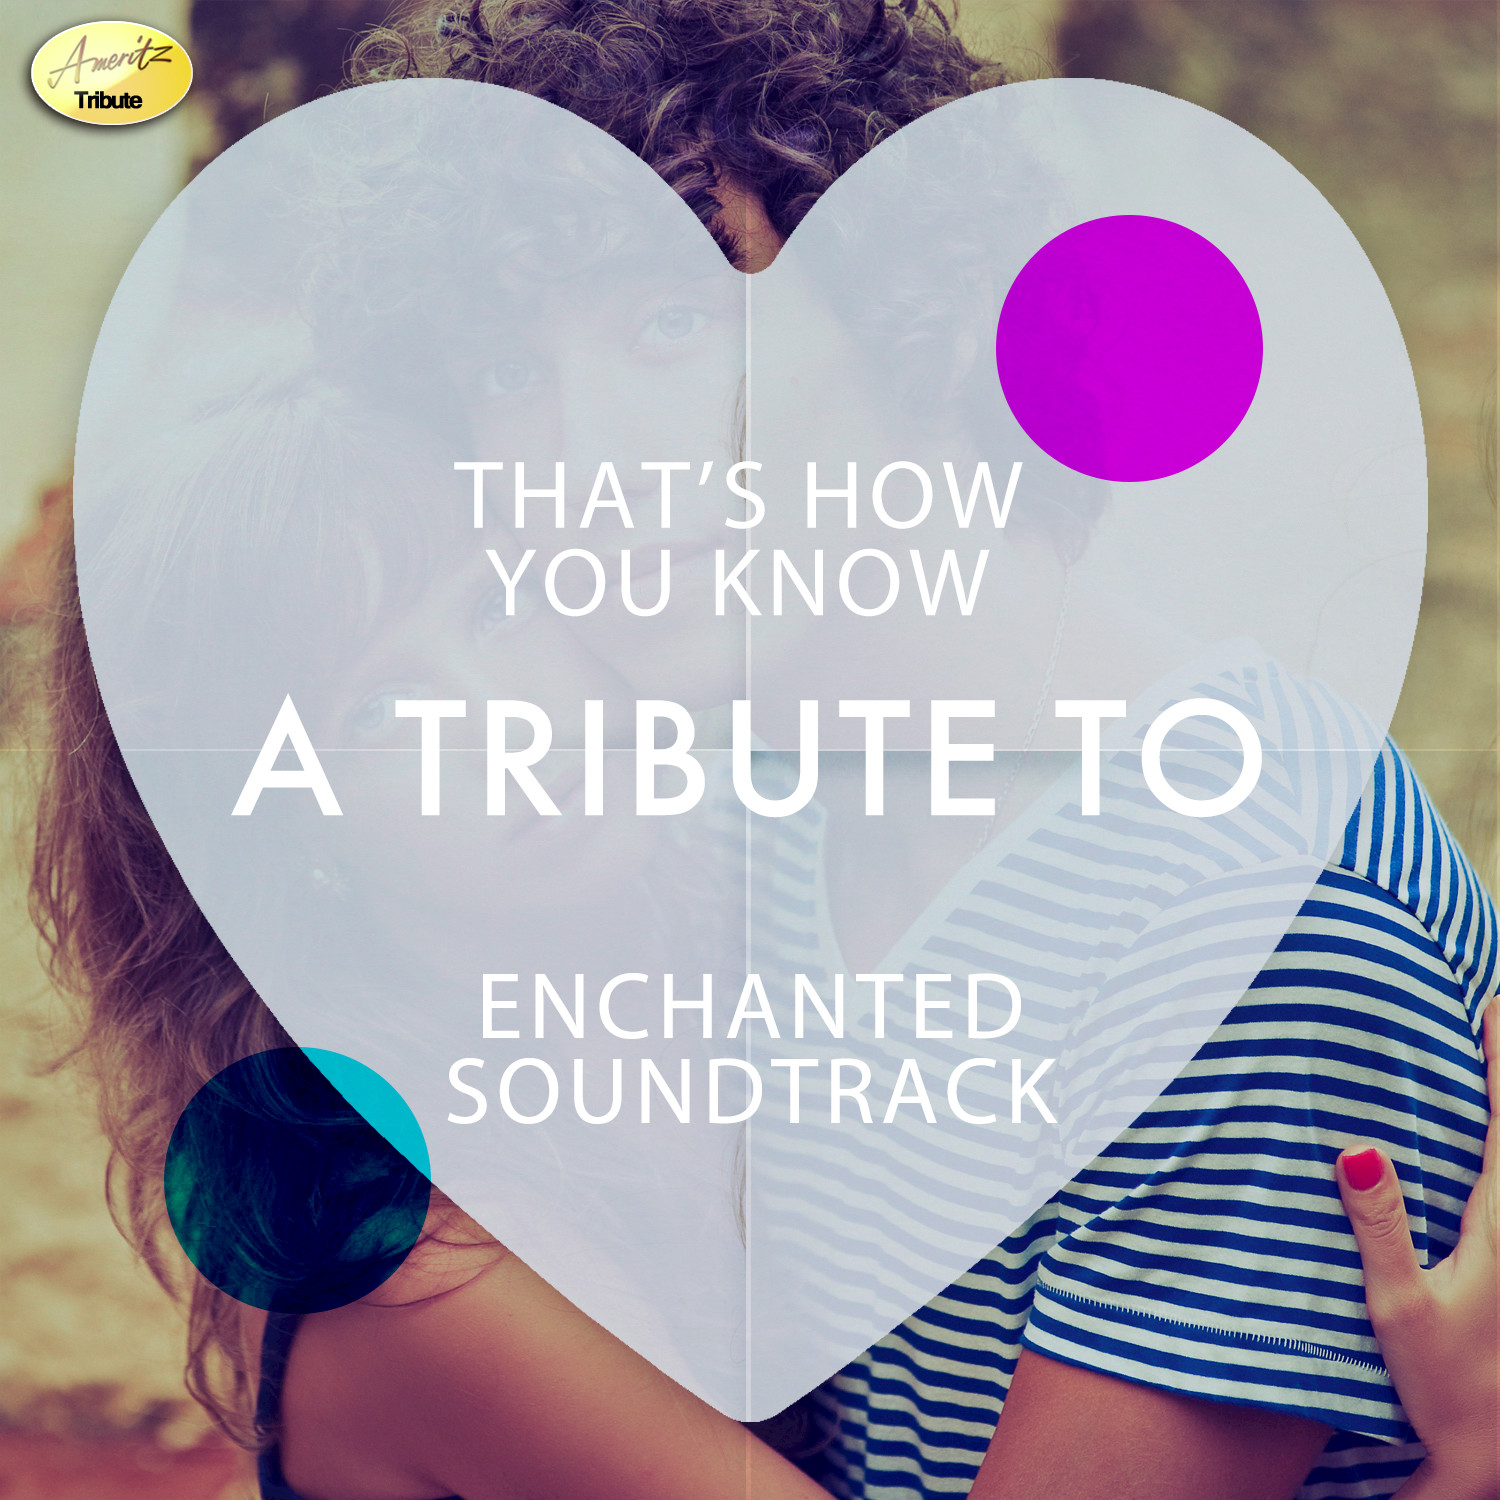 That's How You Know - A Tribute to Enchanted Soundtrack